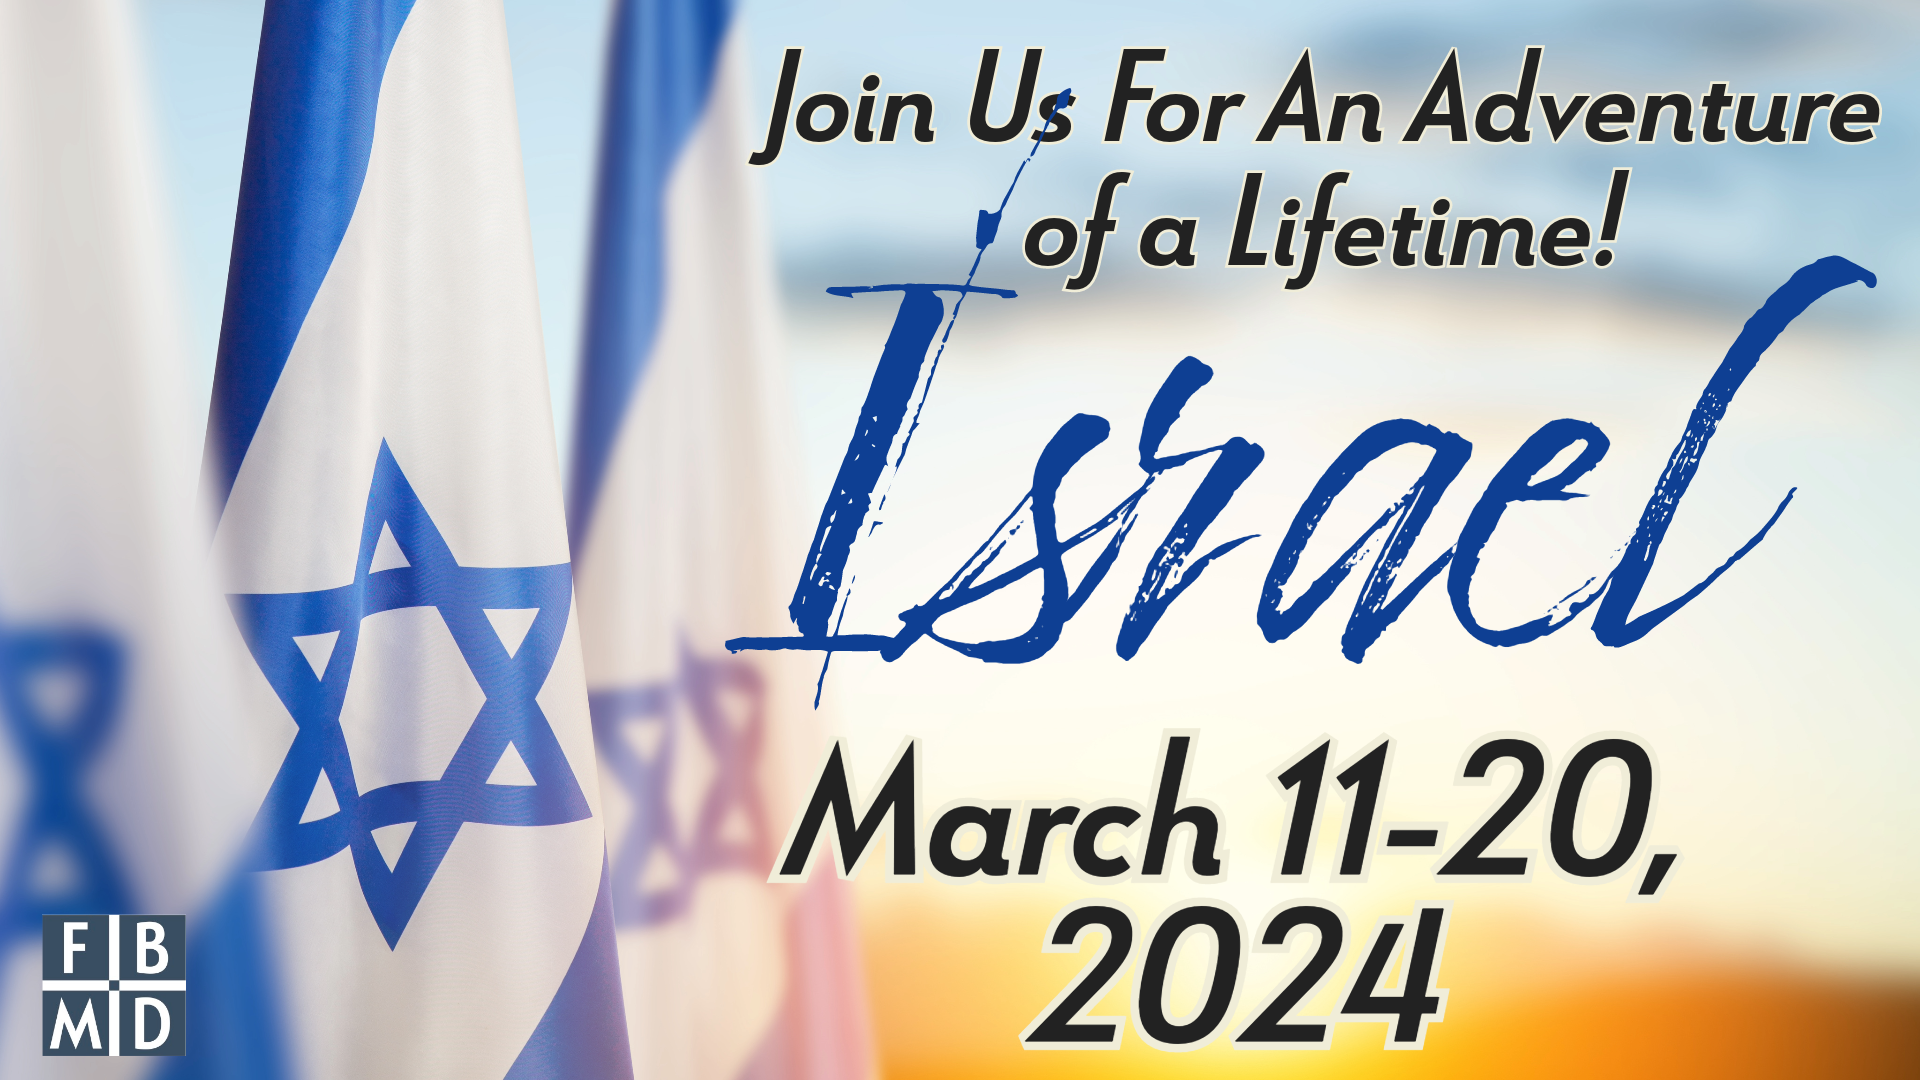 invitation for a trip to Israel Mar 11 to 20, 2024